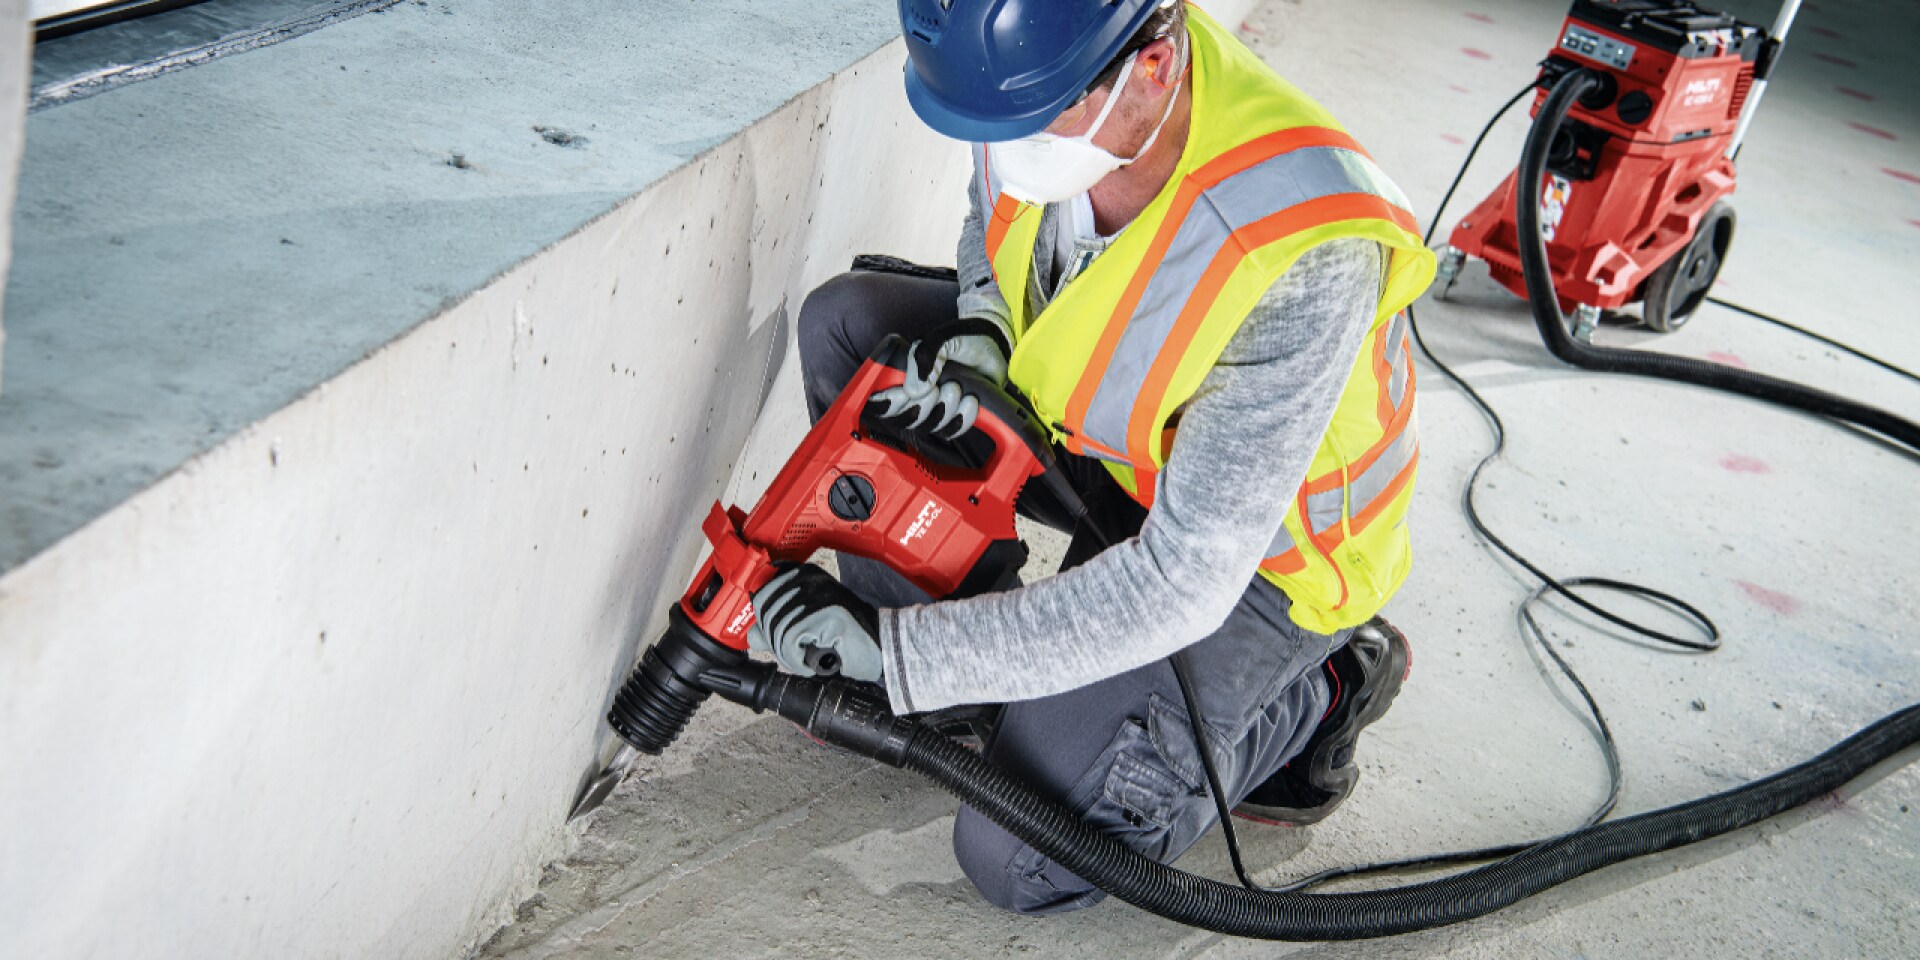 TE 2000-AVR concrete demolition hammer being used with a dust removal system and vacuum cleaner for virtually dust-free chiseling / breaking